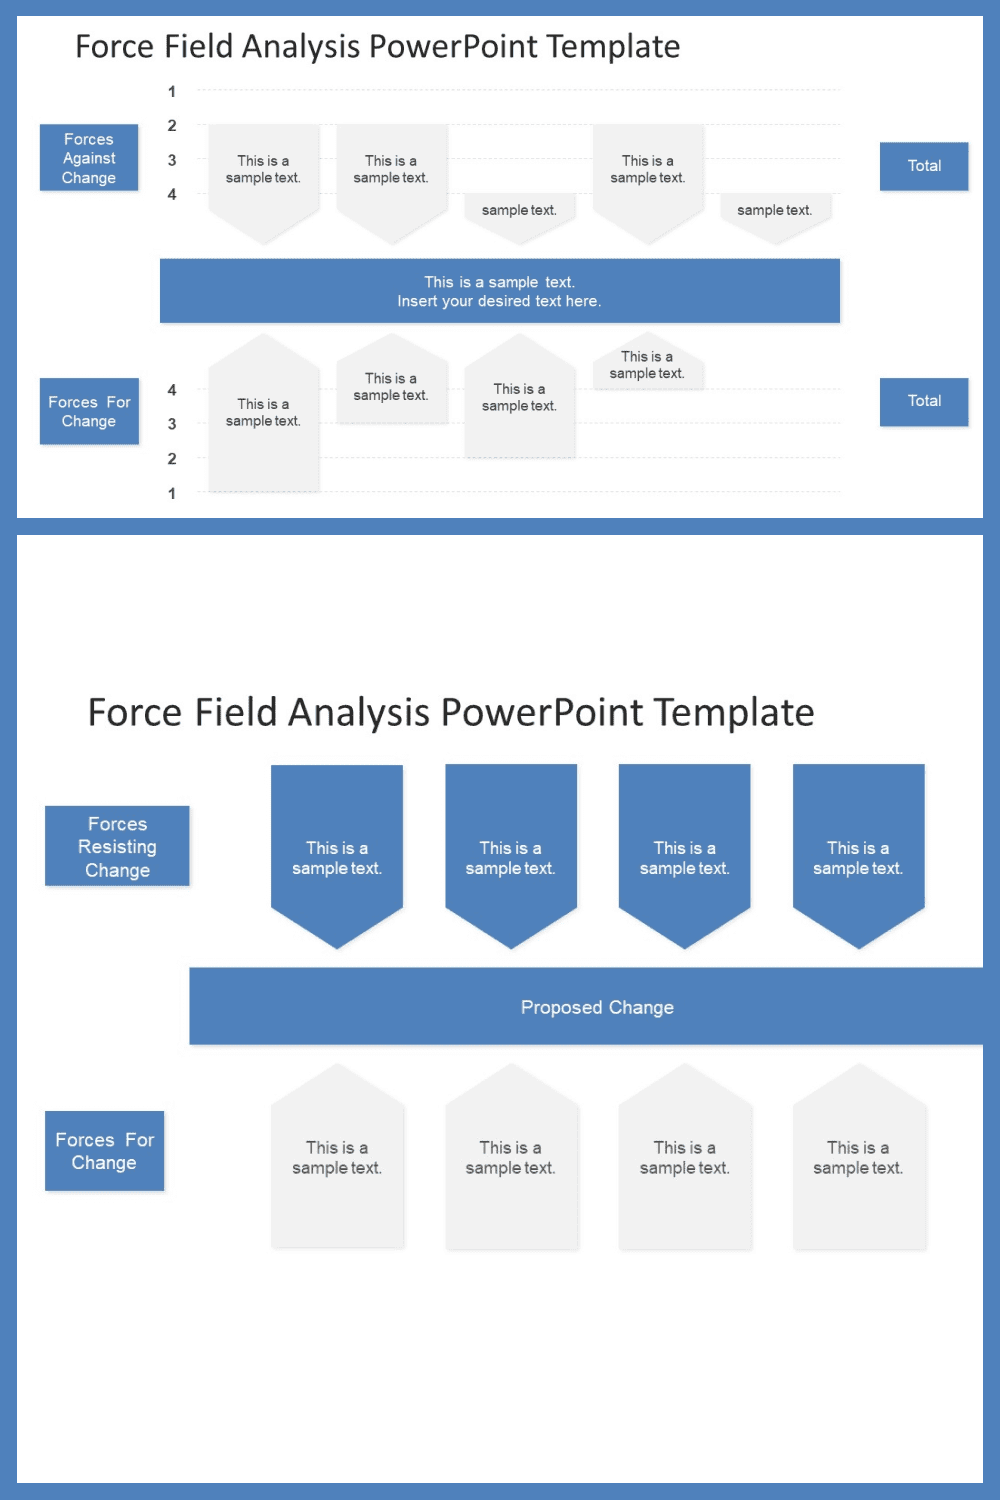 Force field analysis powerpoint diagram template.